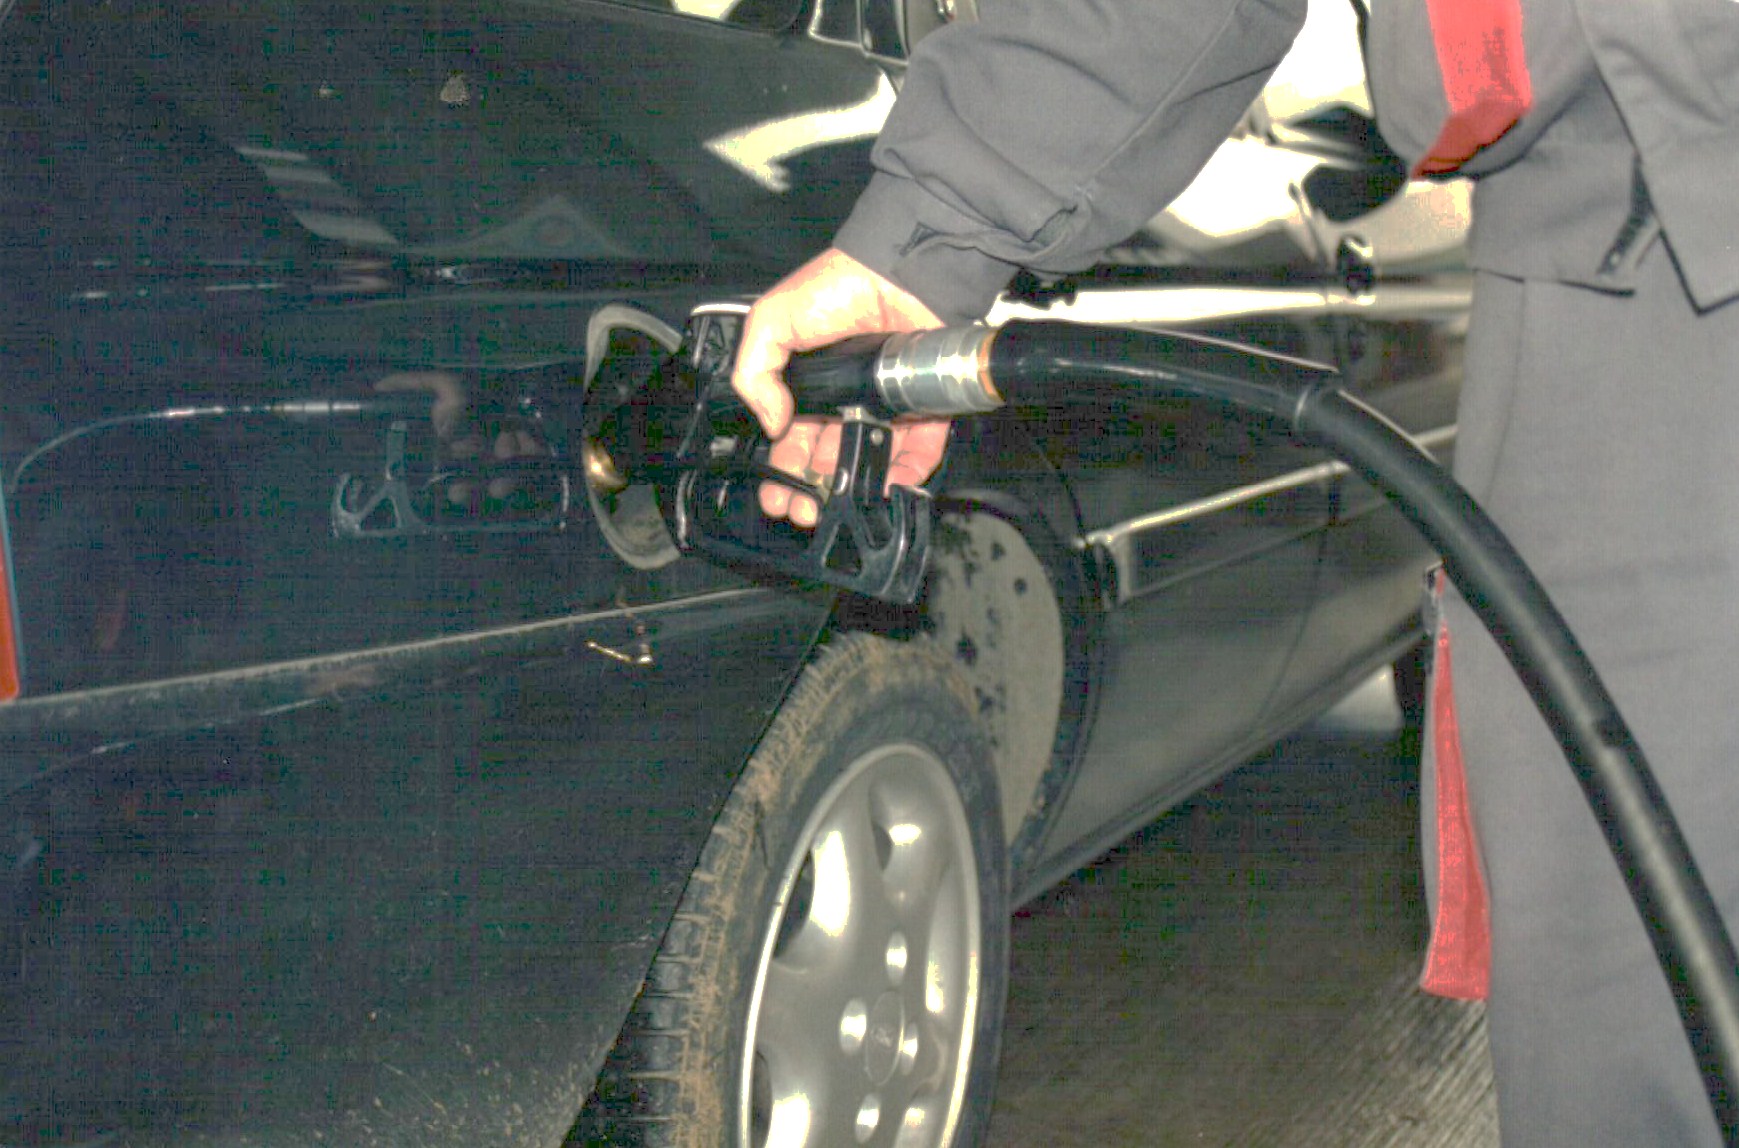 A person refueling a dark car at a gas station, focusing on the fuel nozzle inserted into the car's tank.